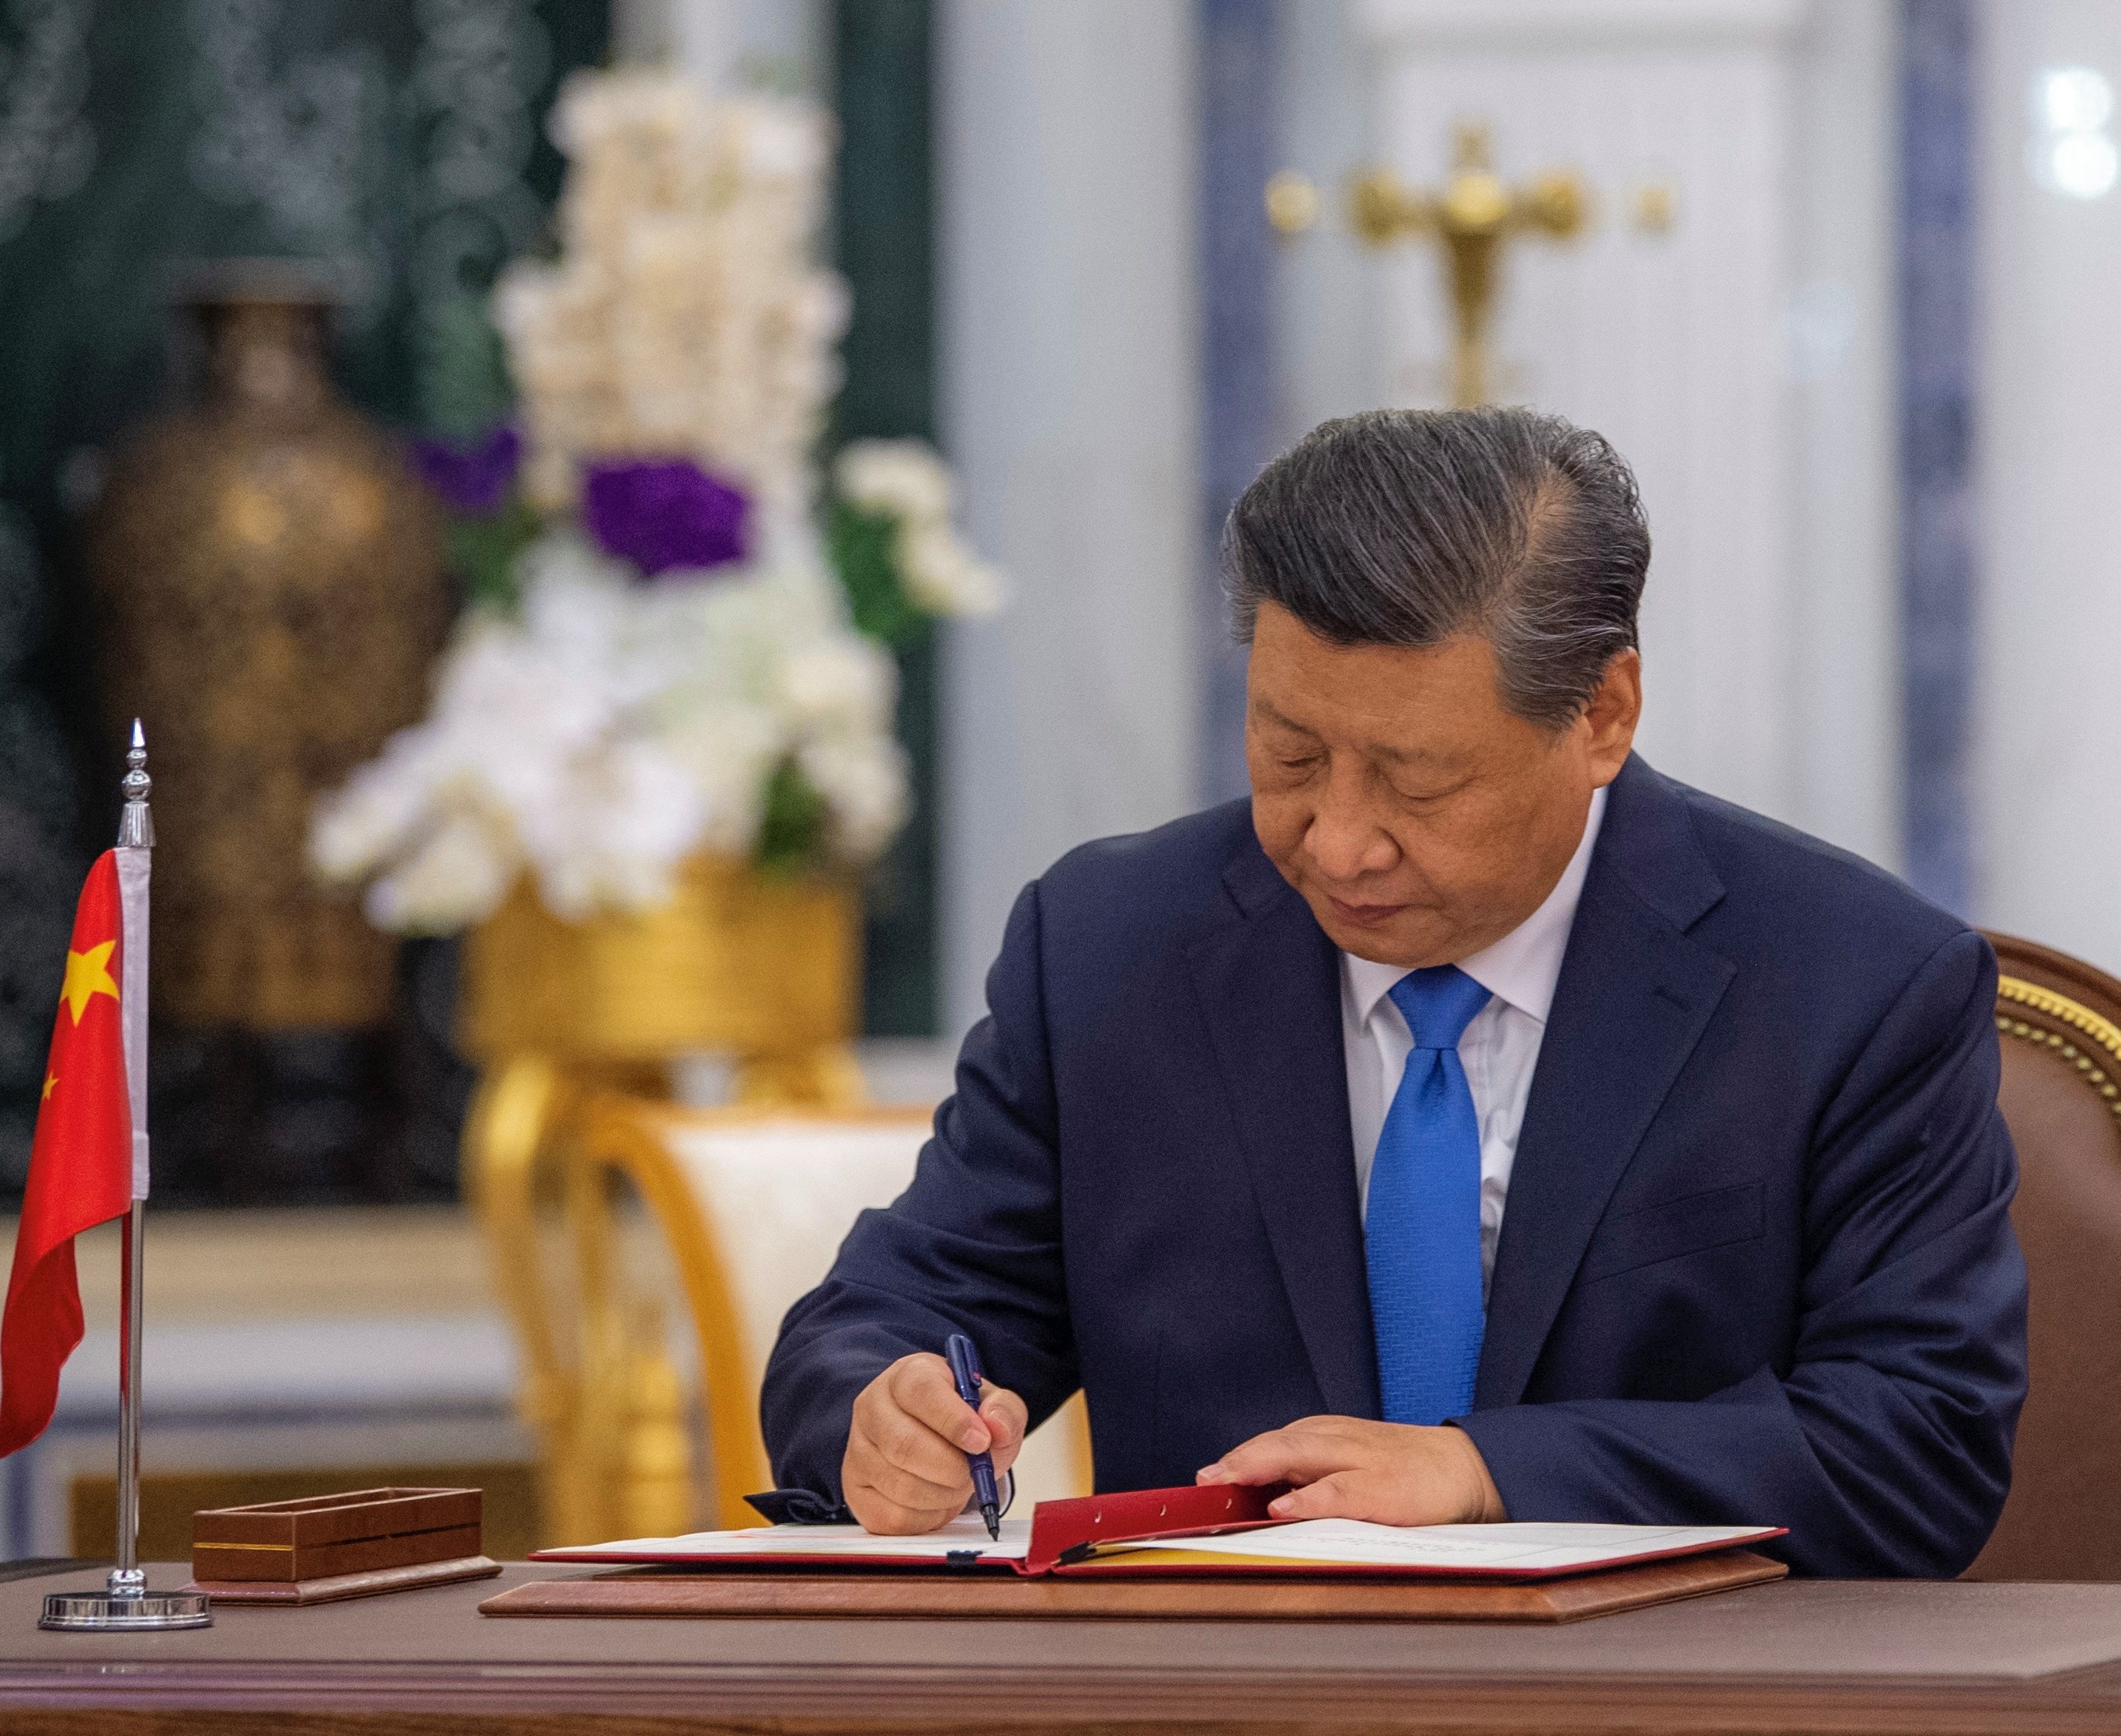 Chinese President Xi signs a document during meeting with Saudi king in Riyadh